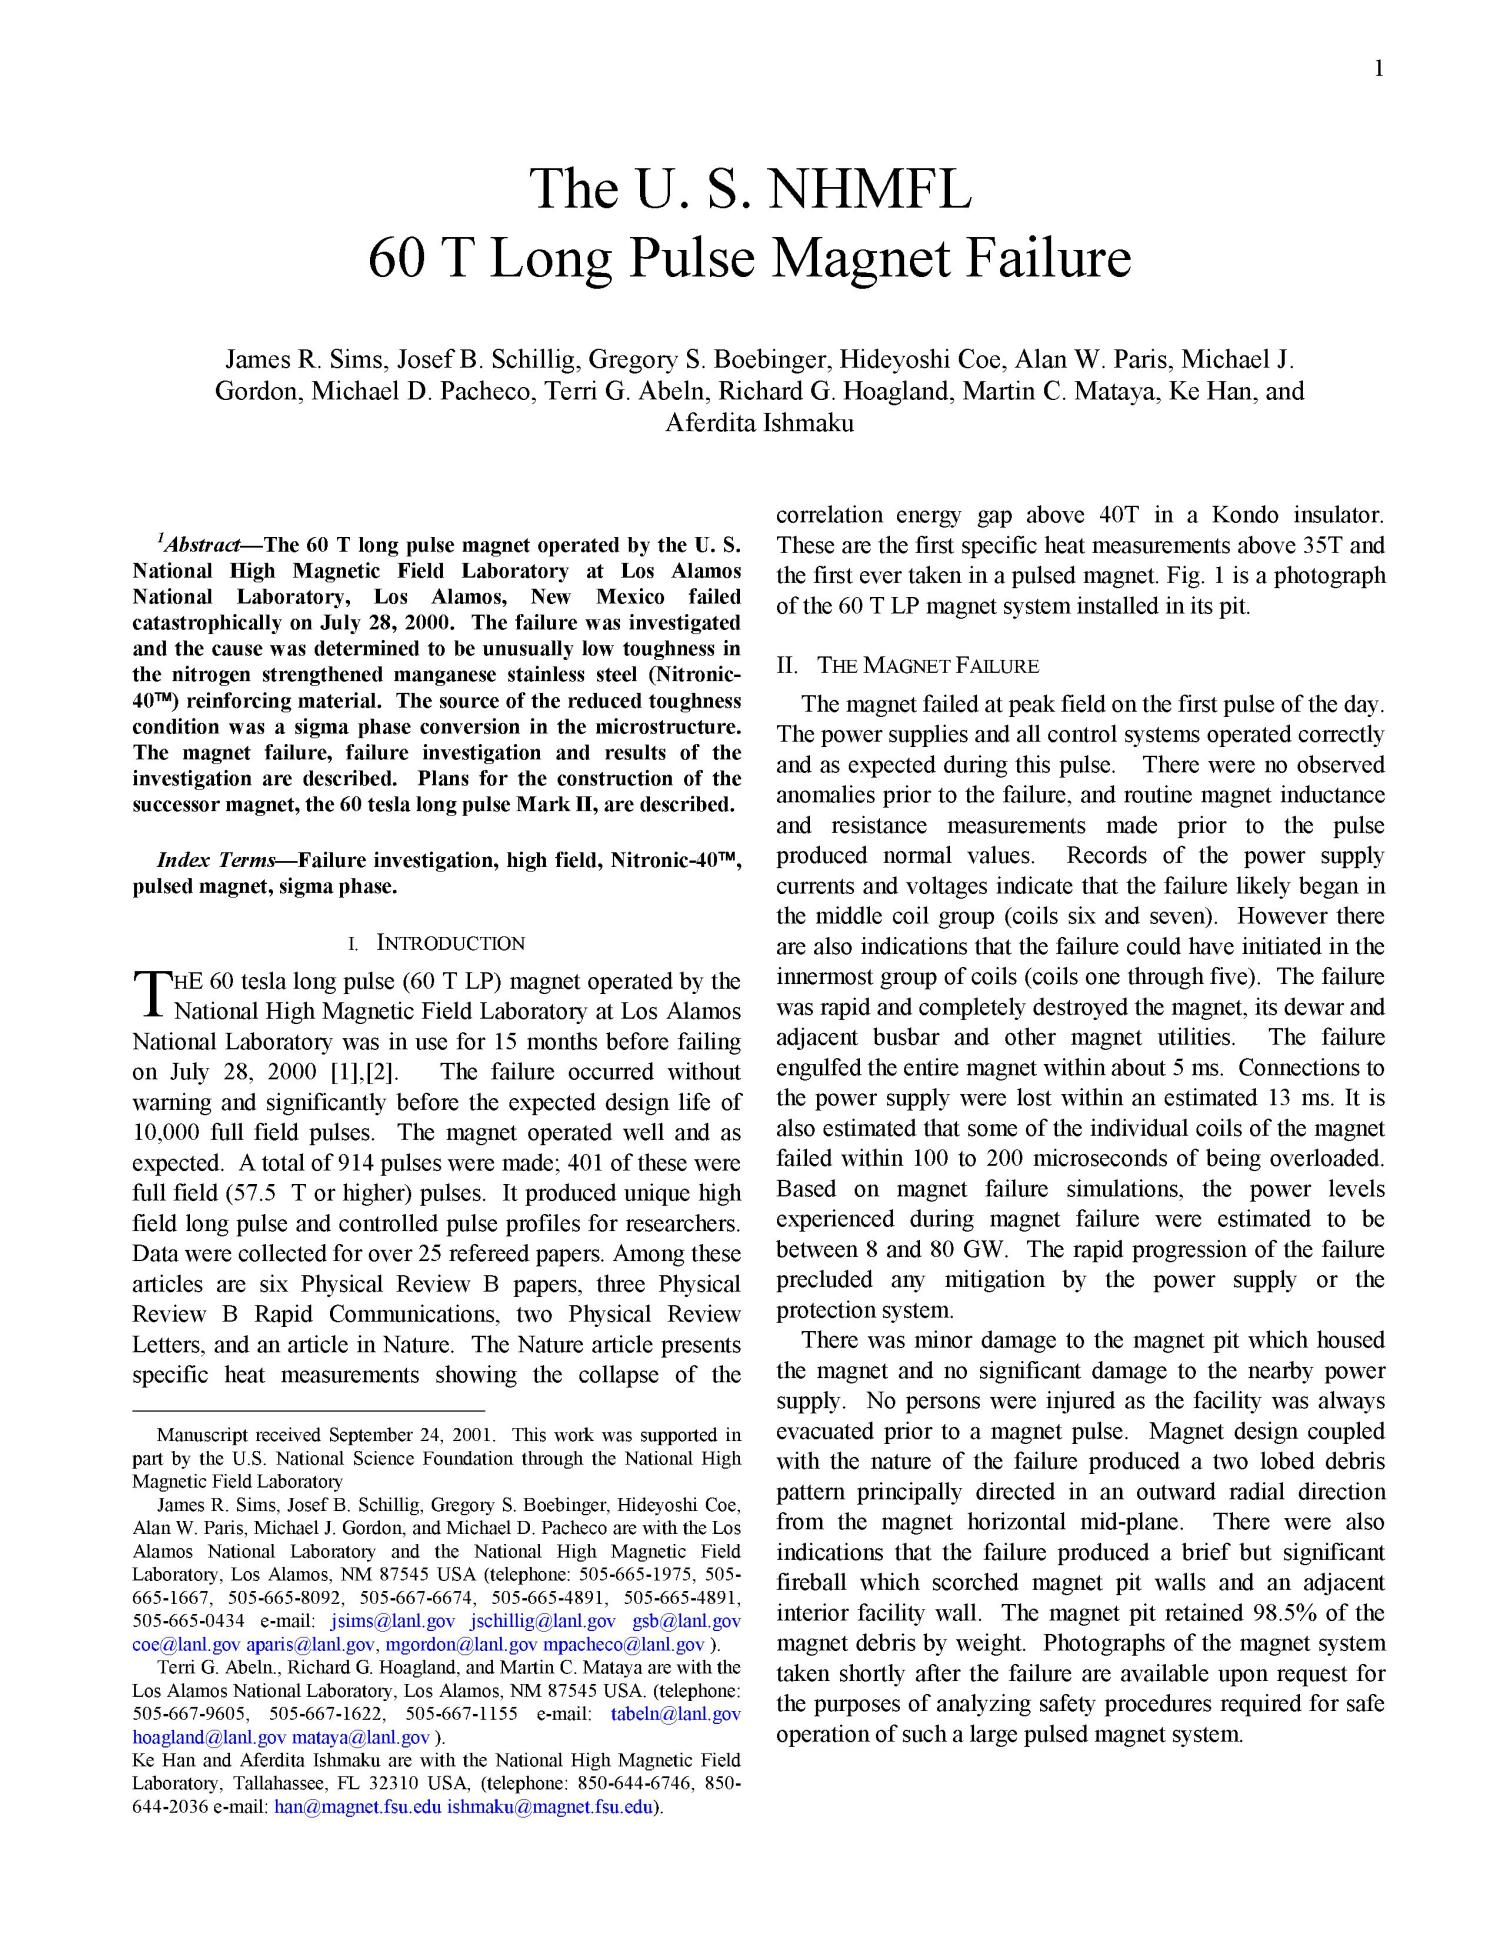 The U.S. NHMFL 60 T long pulse magnet failure
                                                
                                                    [Sequence #]: 2 of 5
                                                